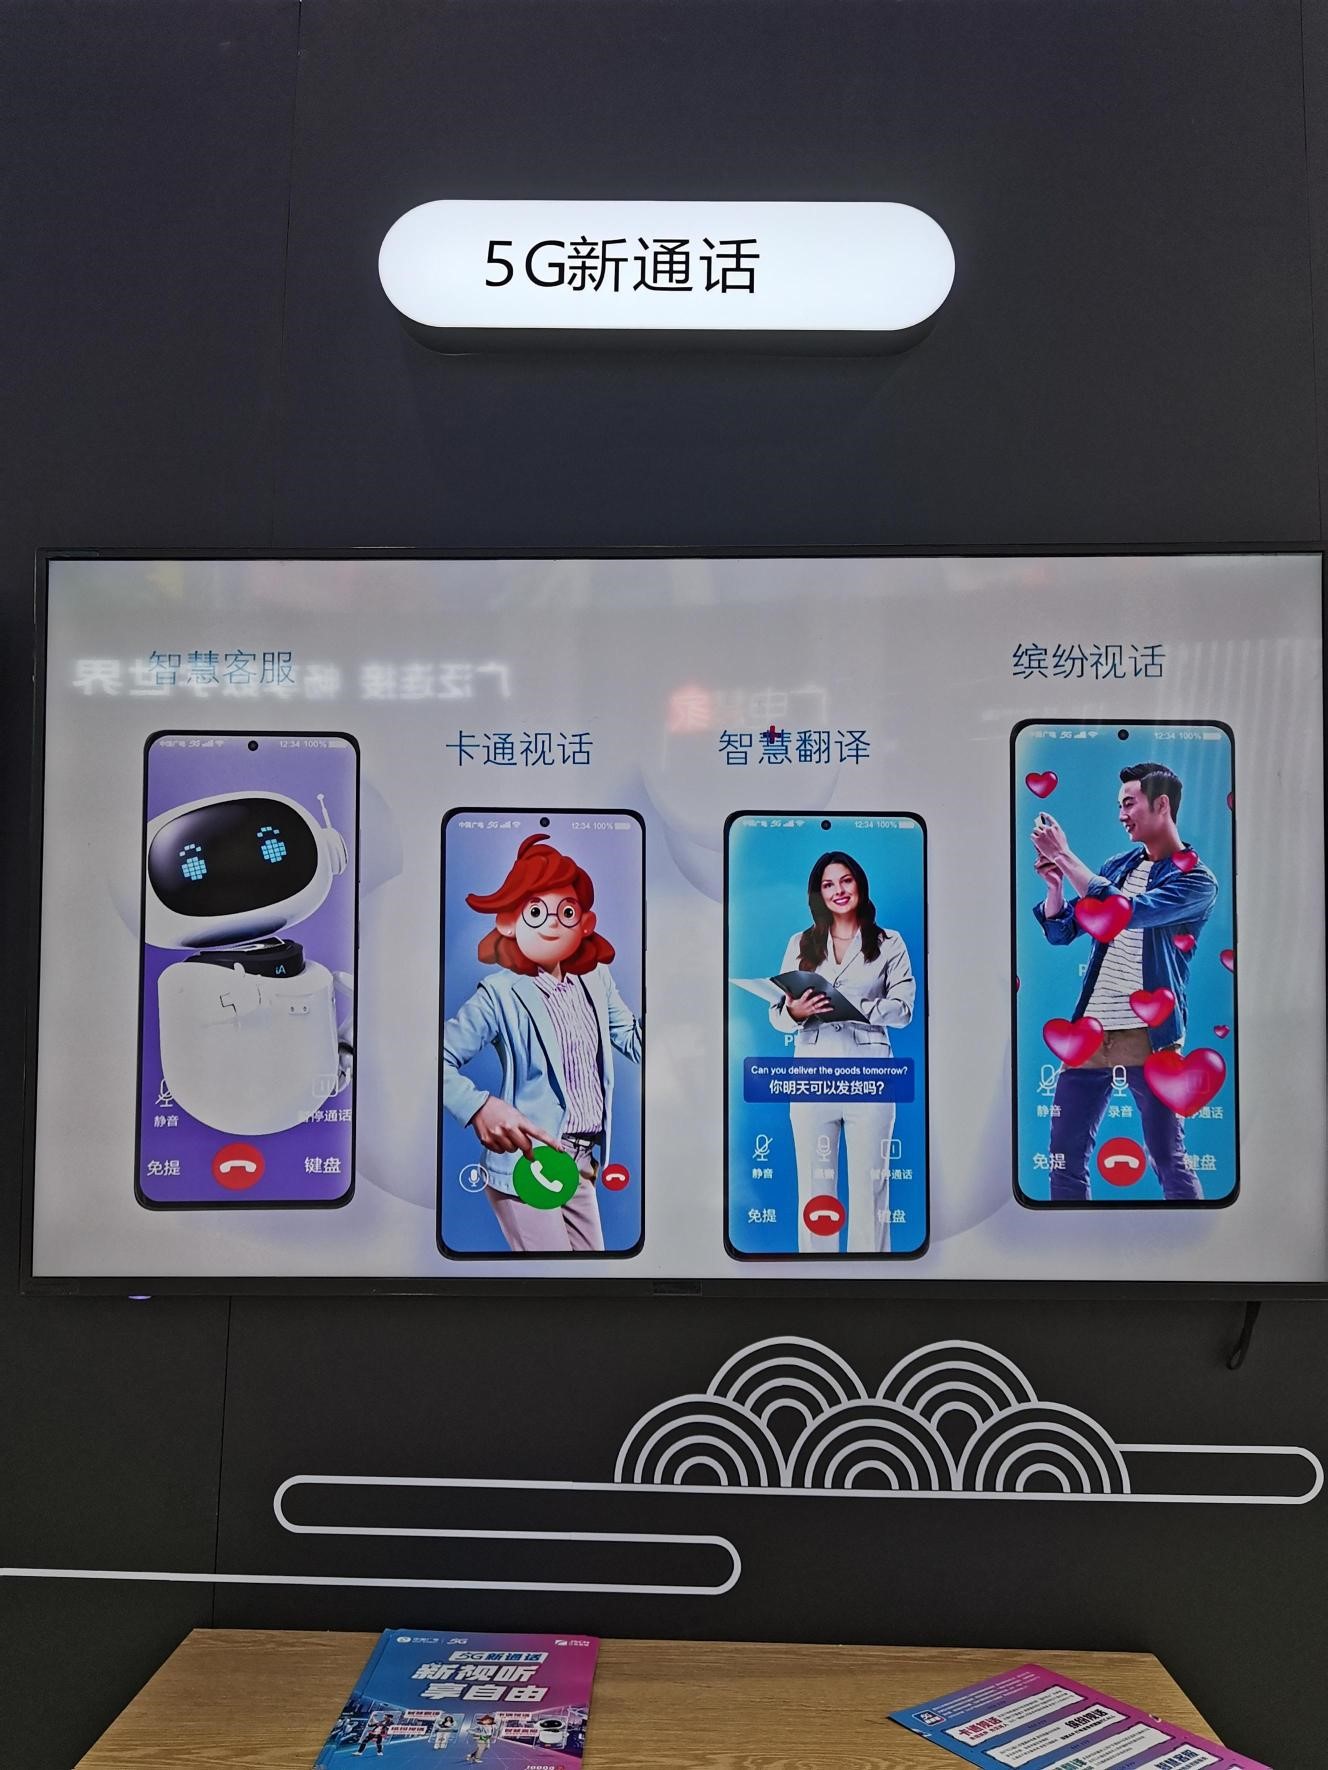 China Broadnet showcases new 5G calling features